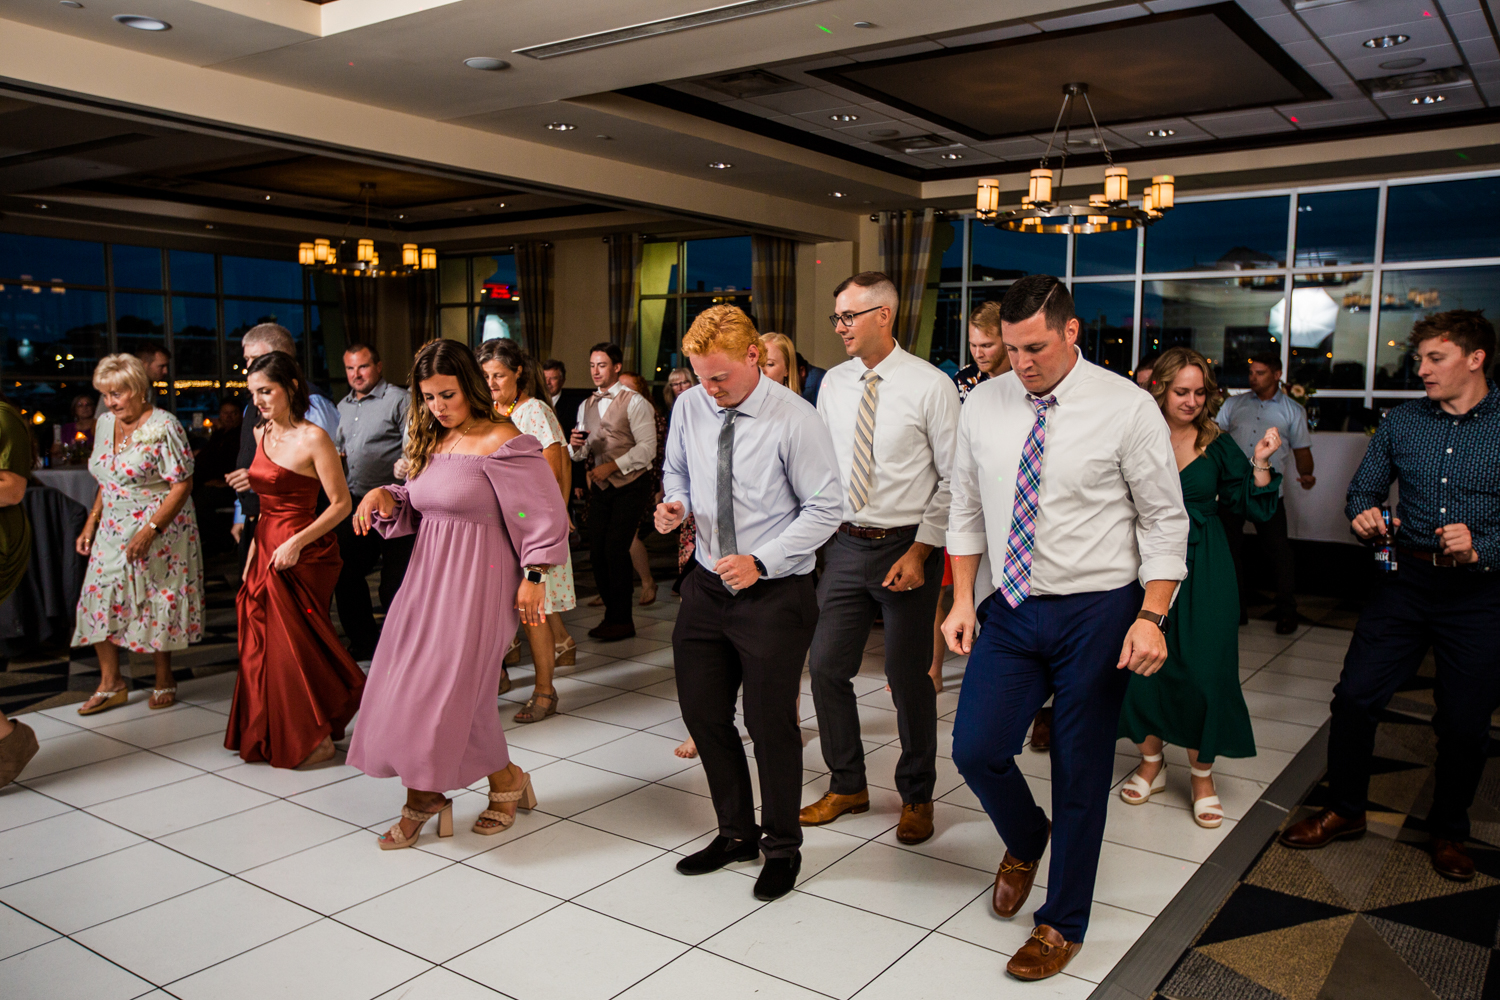 Guests dancing at an Erie PA wedding reception